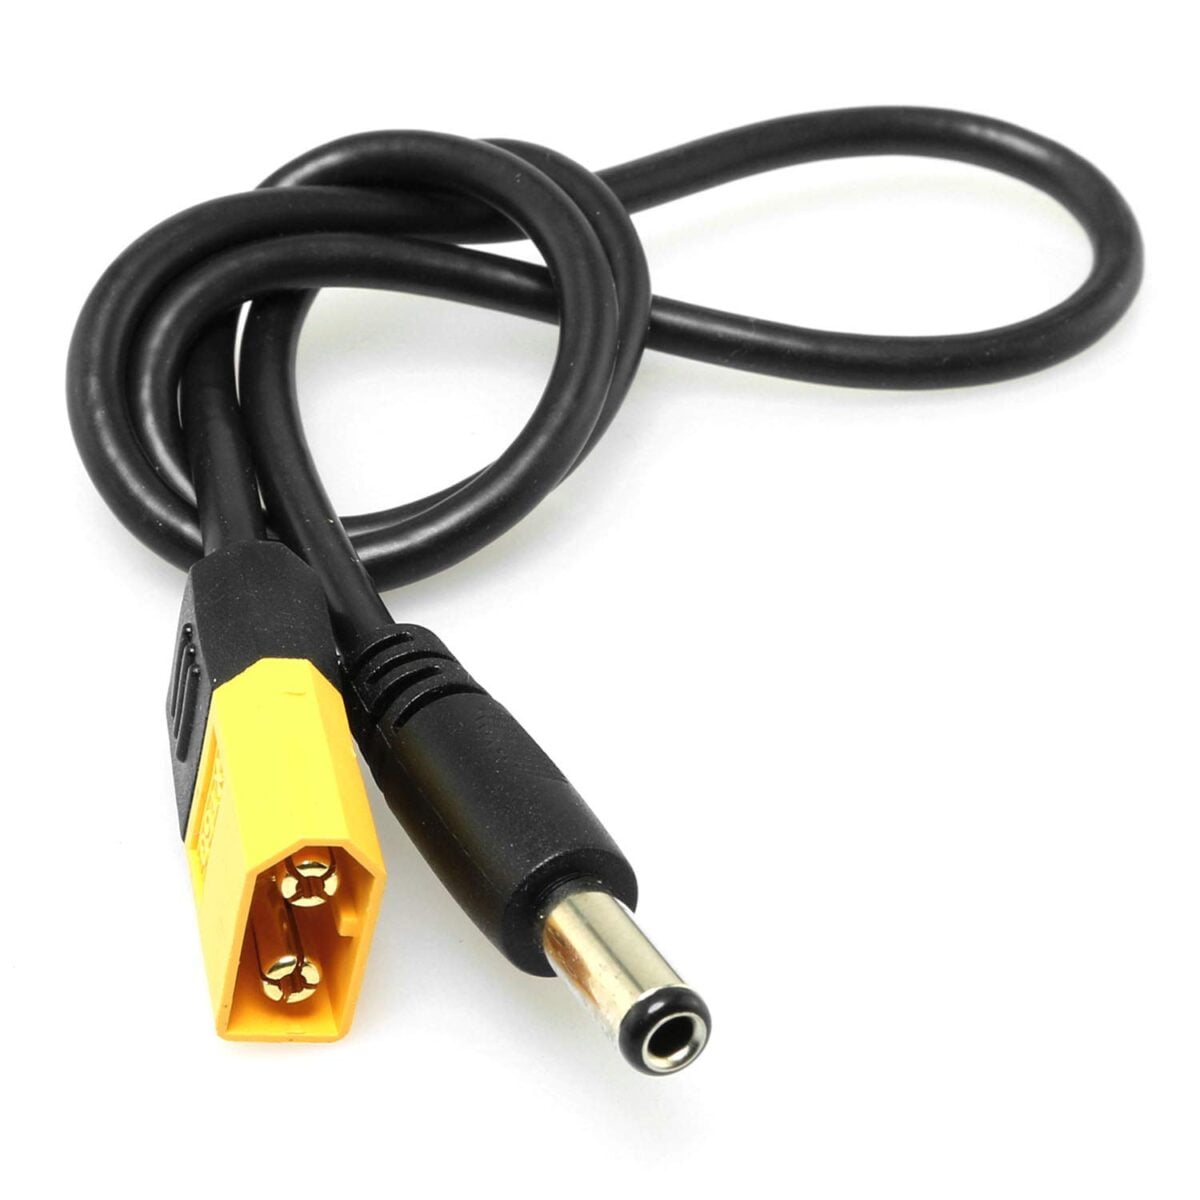 XT60 Adapter Cable XT60 Male Bullet Connector to Male DC 5.5mm X 2.5mm Power Cable